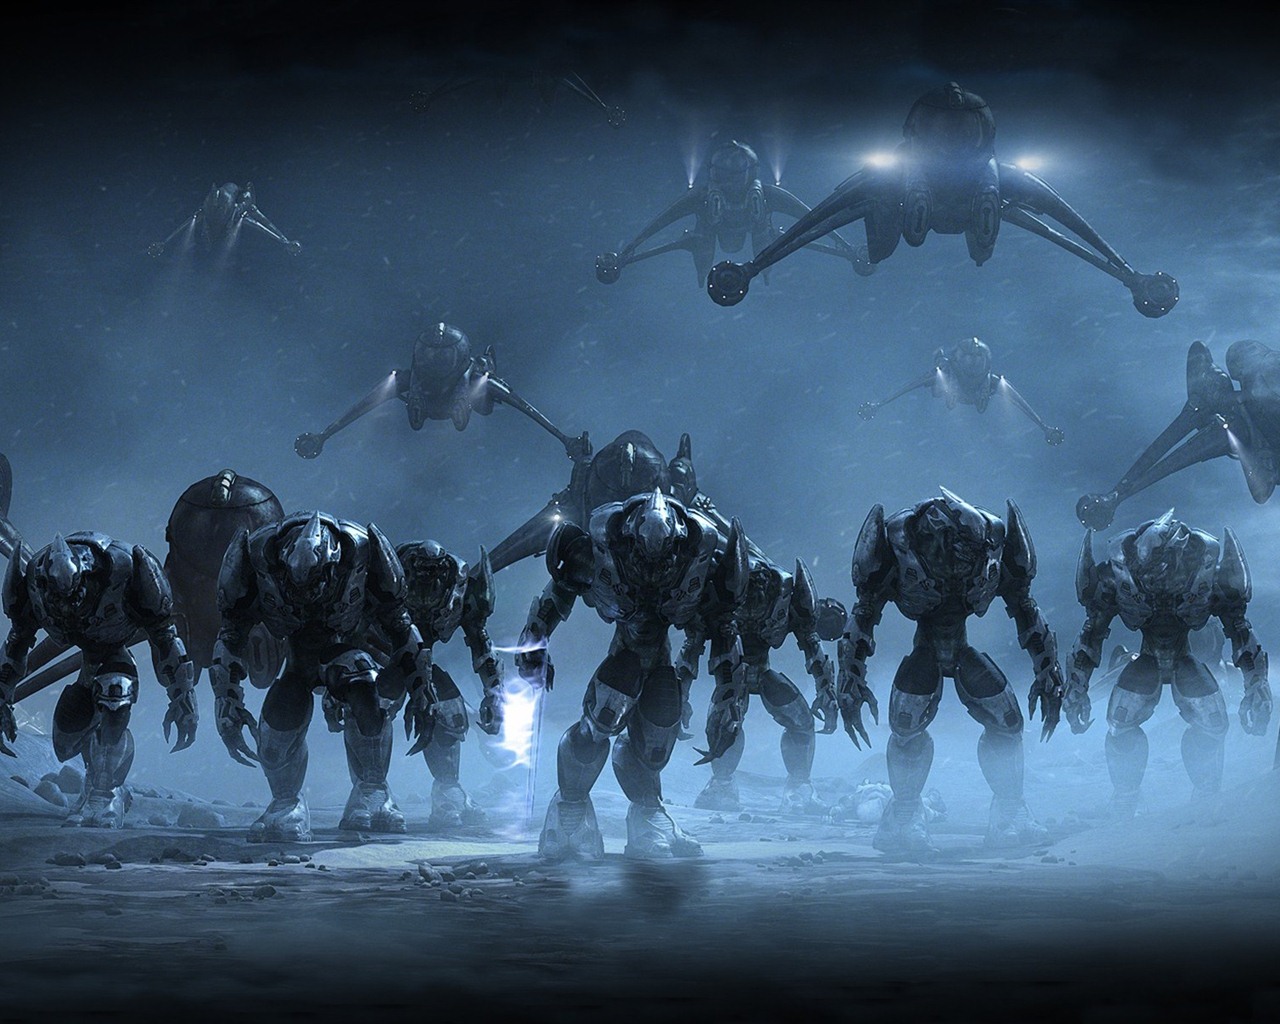 Halo game HD wallpapers #26 - 1280x1024